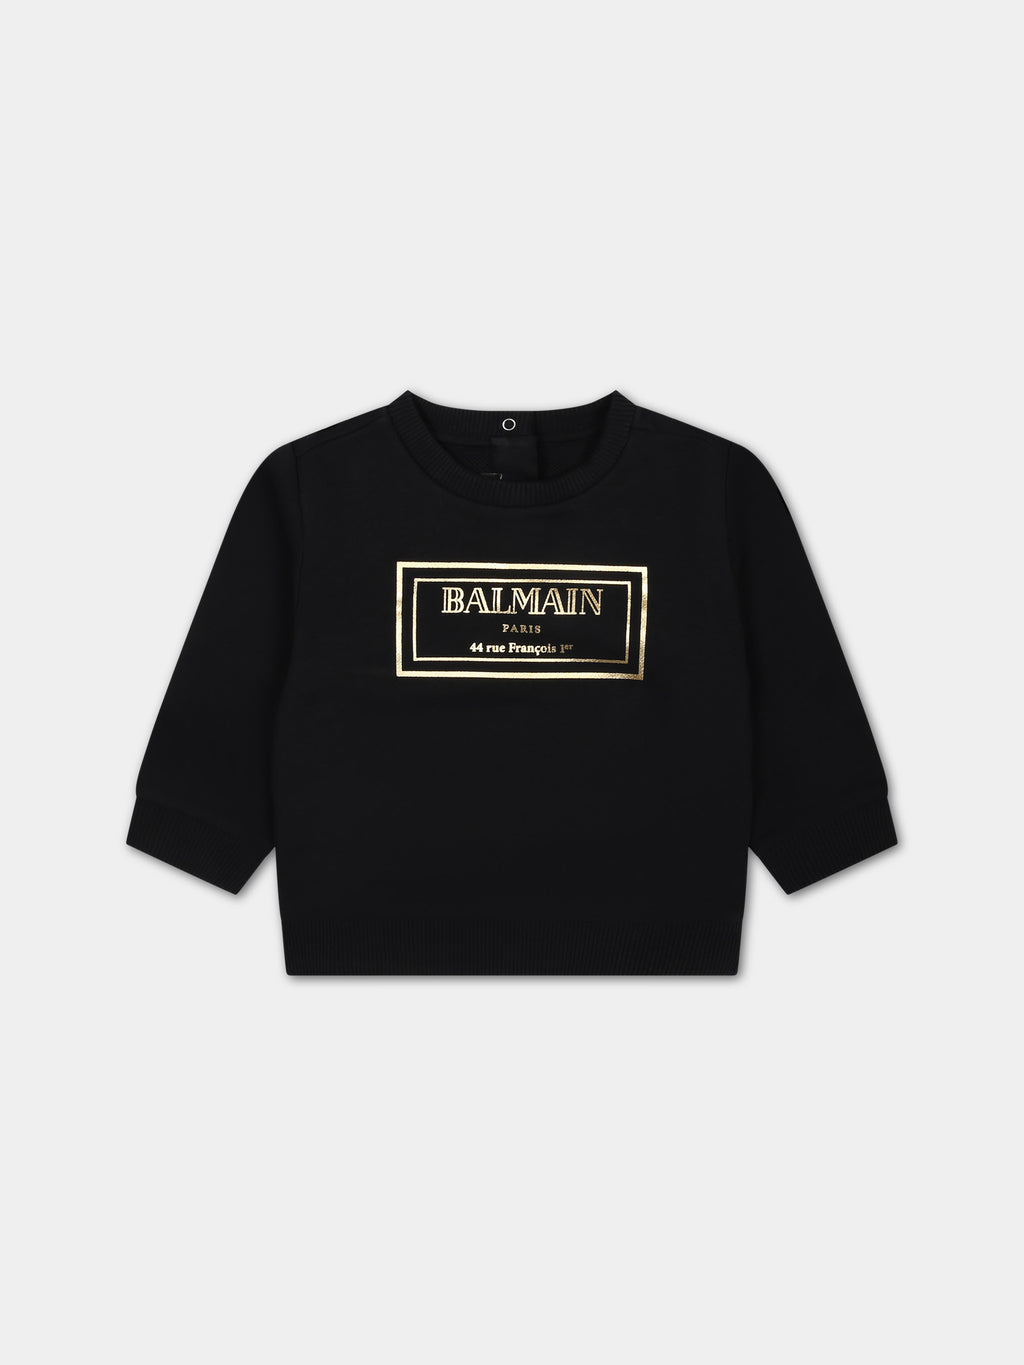 Black sweatshirt for babies with gold logo